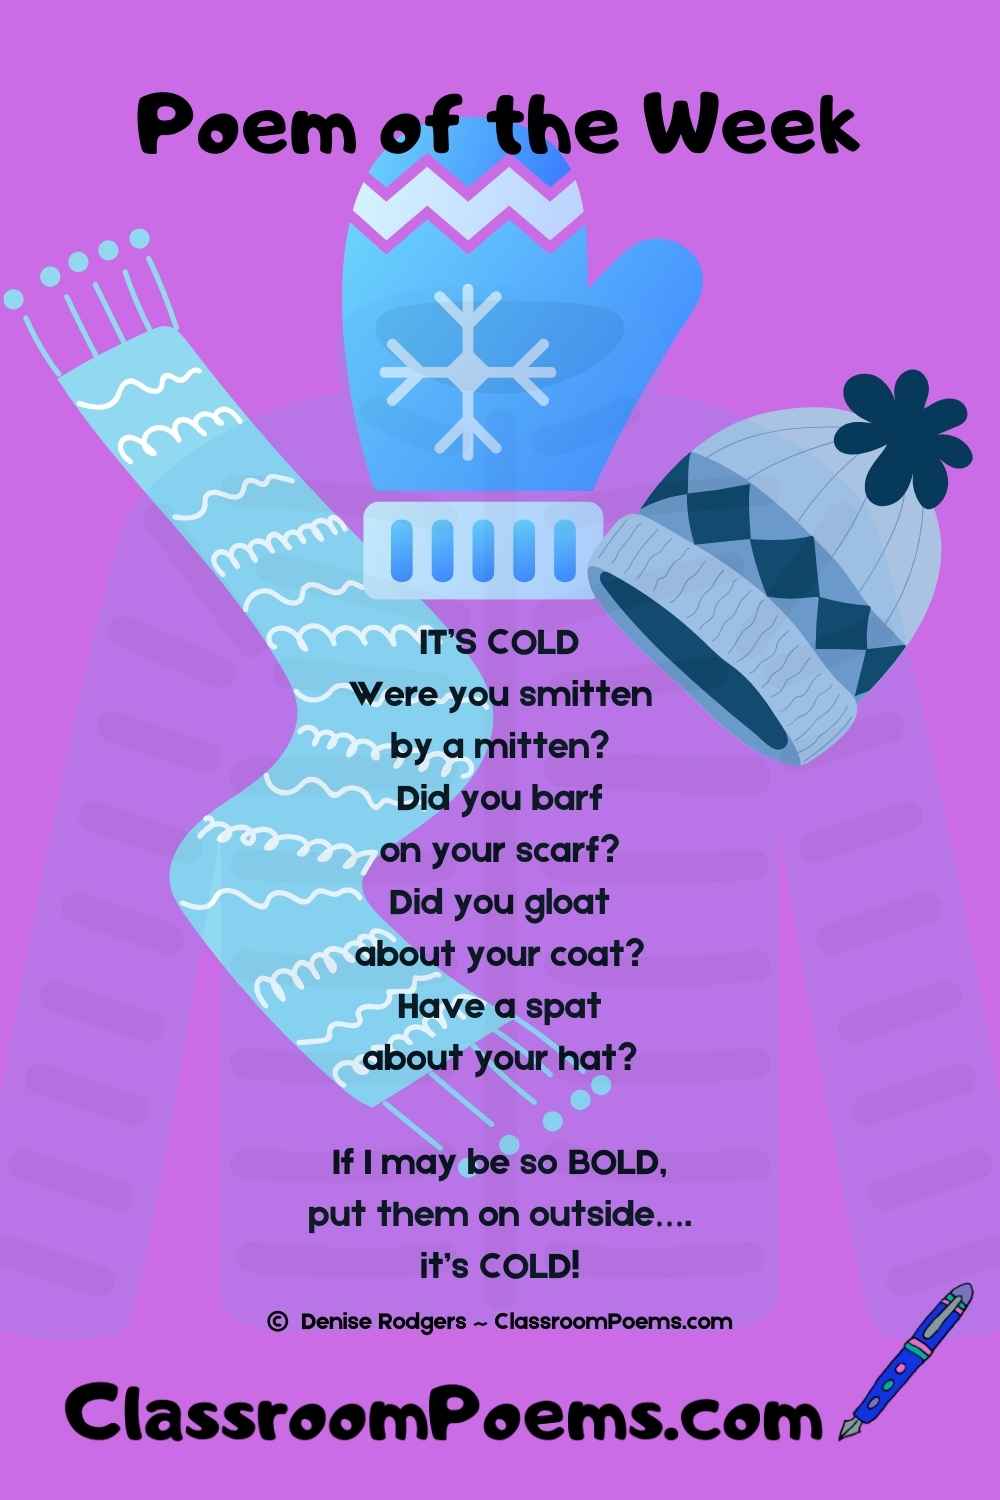 IT'S COLD, a winter poem for kids by Denise Rodgers on ClassroomPoems.com.